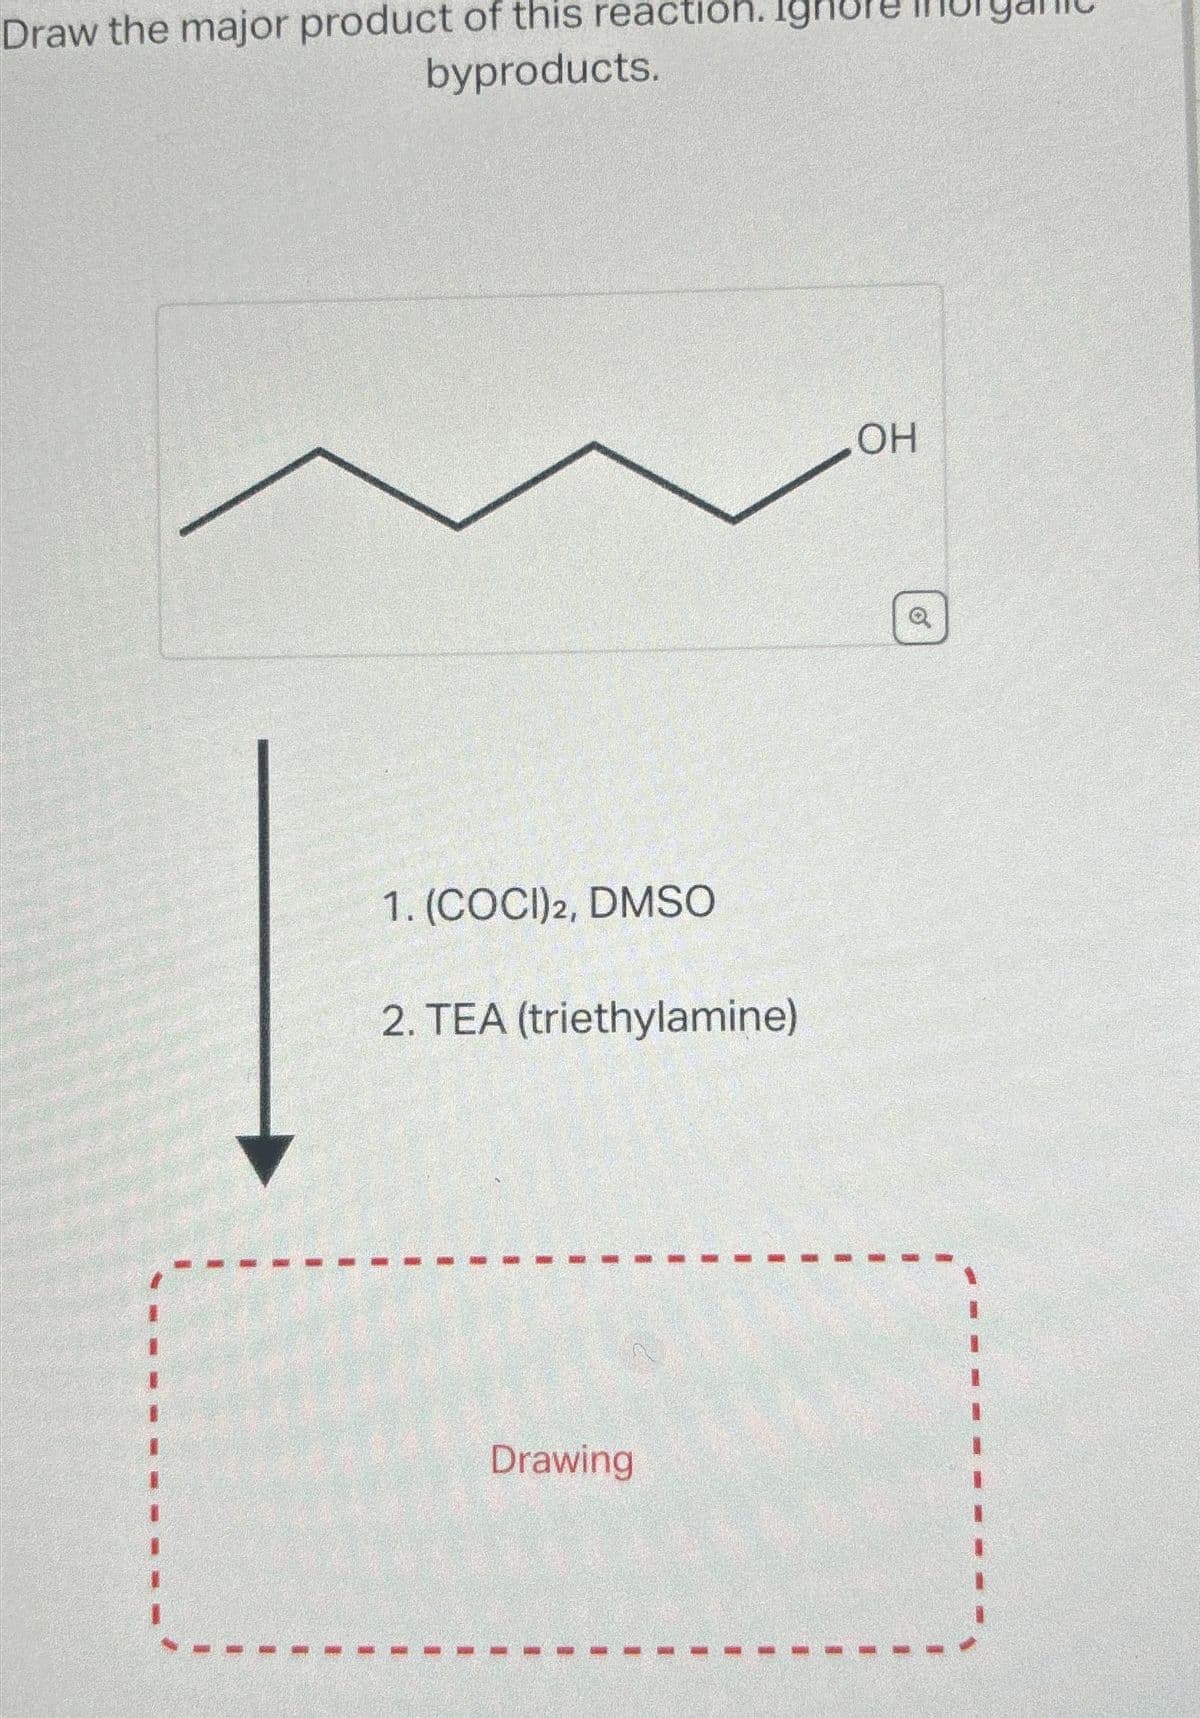 Draw the major product of this reaction. Igh
byproducts.
1. (COCI) 2, DMSO
2. TEA (triethylamine)
Drawing
OH
O